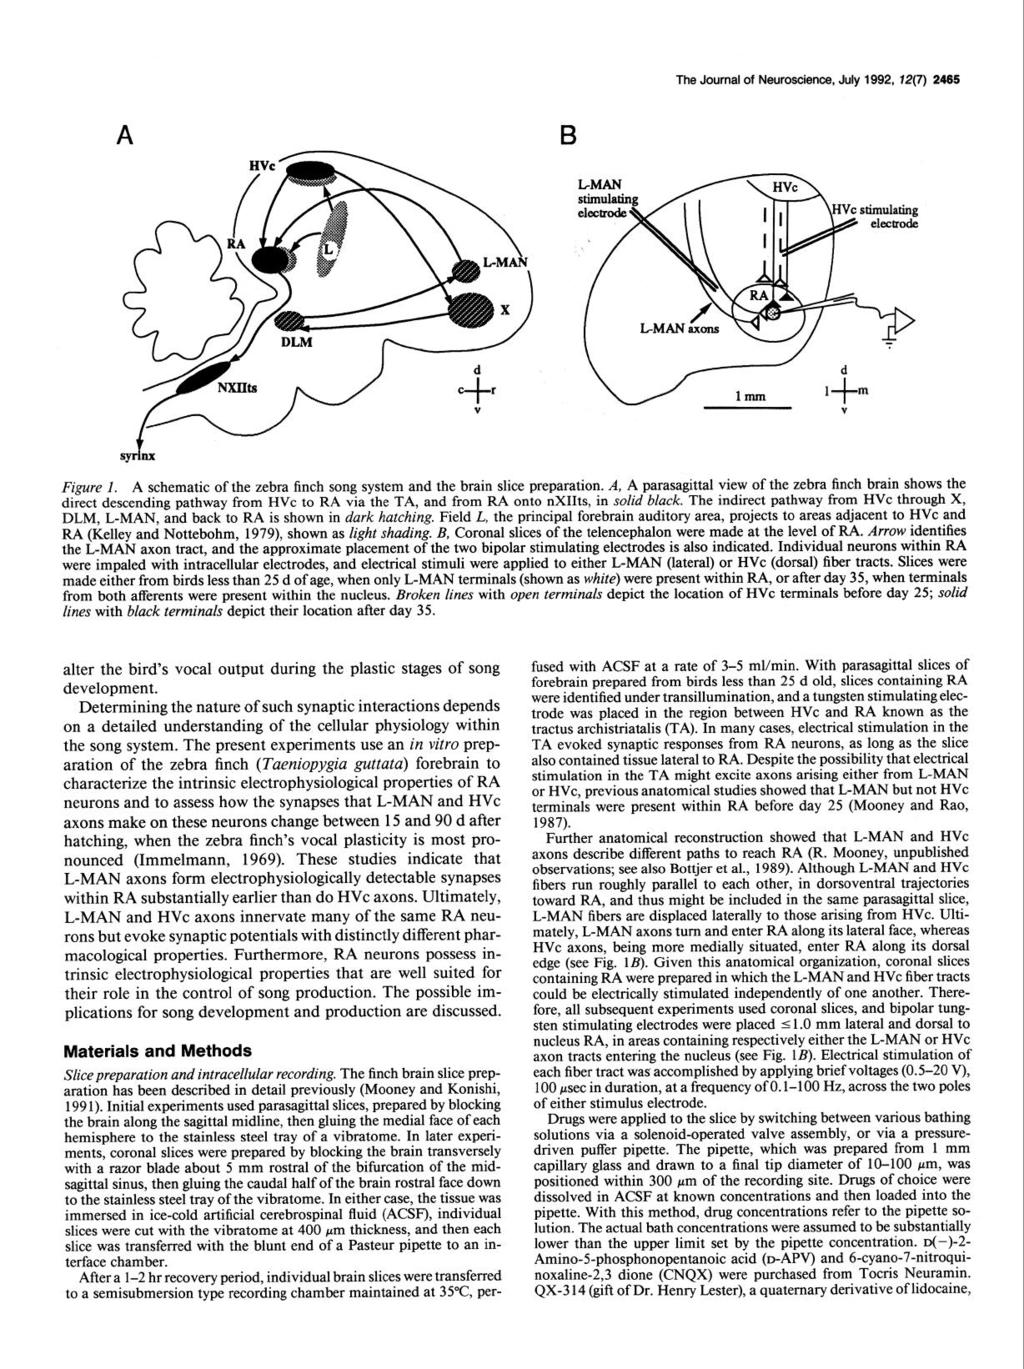 The Journal of Neuroscience, July 1992, 12(7) 2465 A syrinx Figure 1. A schematic of the zebra finch song system and the brain slice preparation.